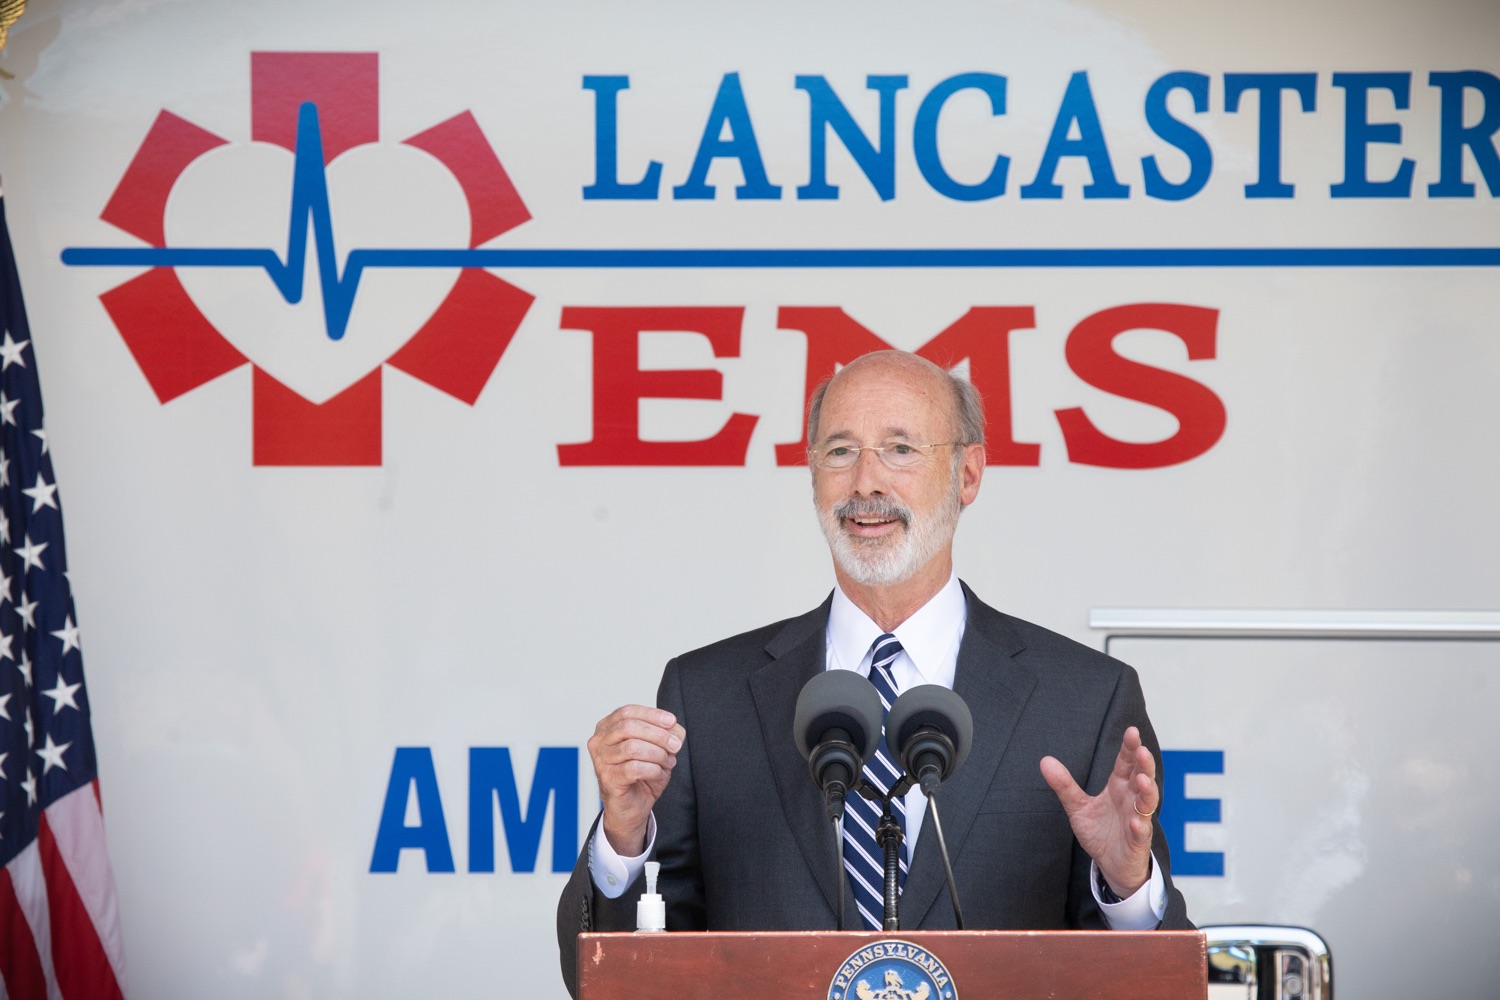 Pennsylvania Governor Tom Wolf speaking to the press. Governor Tom Wolf visited the Millersville location of Lancaster EMS today to thank first responders and learn about how they are adapting their critical work during the states response to the COVID-19 pandemic.  Millersville, PA  July 30, 2020<br><a href="https://filesource.amperwave.net/commonwealthofpa/photo/18180_gov_first_responders_dz_001.jpg" target="_blank">⇣ Download Photo</a>